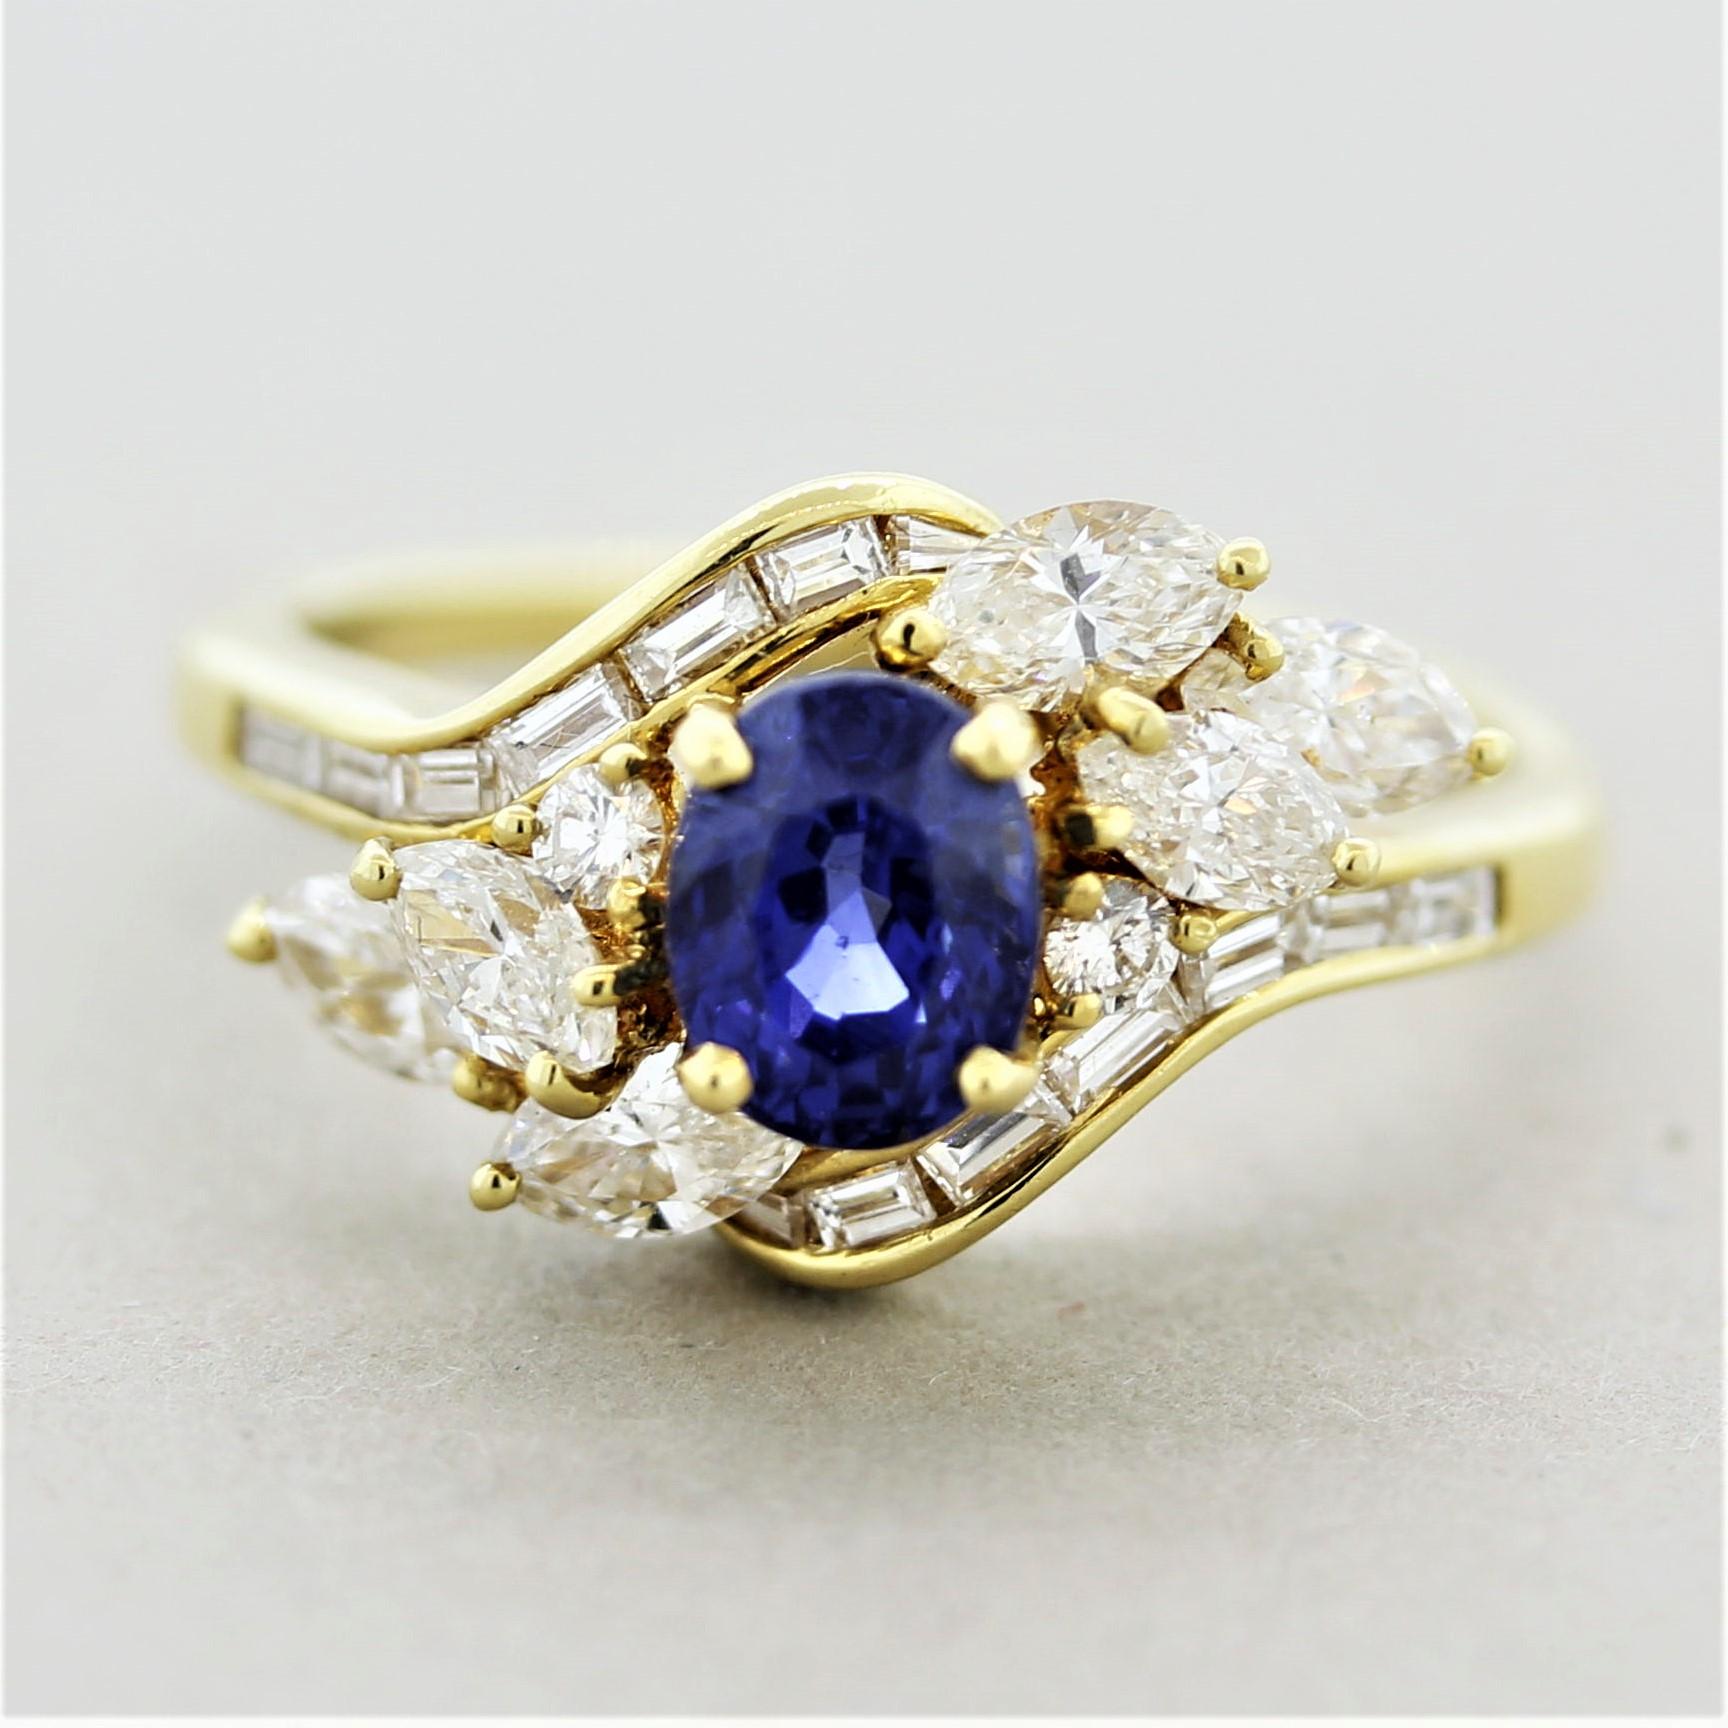 A sweet and stylish spray ring featuring a 1.00 carat oval-shaped sapphire. It has a bright and lovely blue color with excellent brilliance and sparkle. It is accented by 0.90 carats of round brilliant, marquise and baguette-cut diamonds set in a